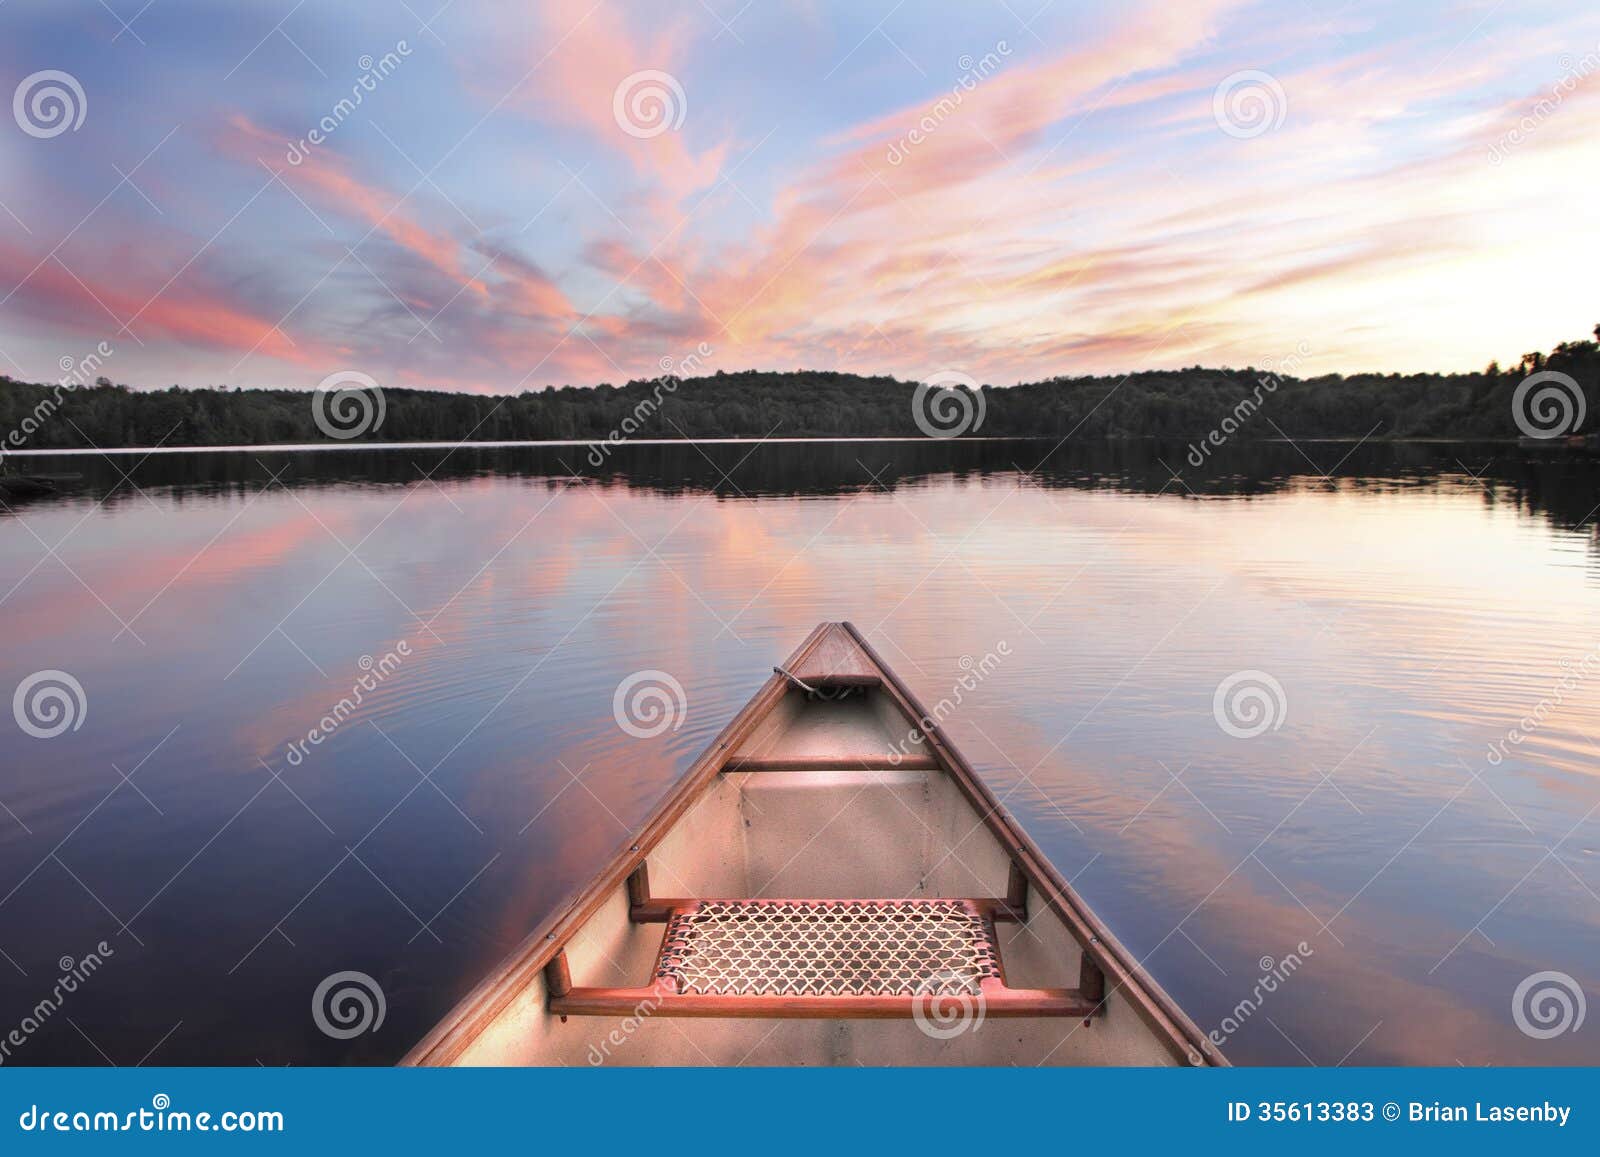 Canoe Bow on a Lake at Sunset - Ontario, Canada.